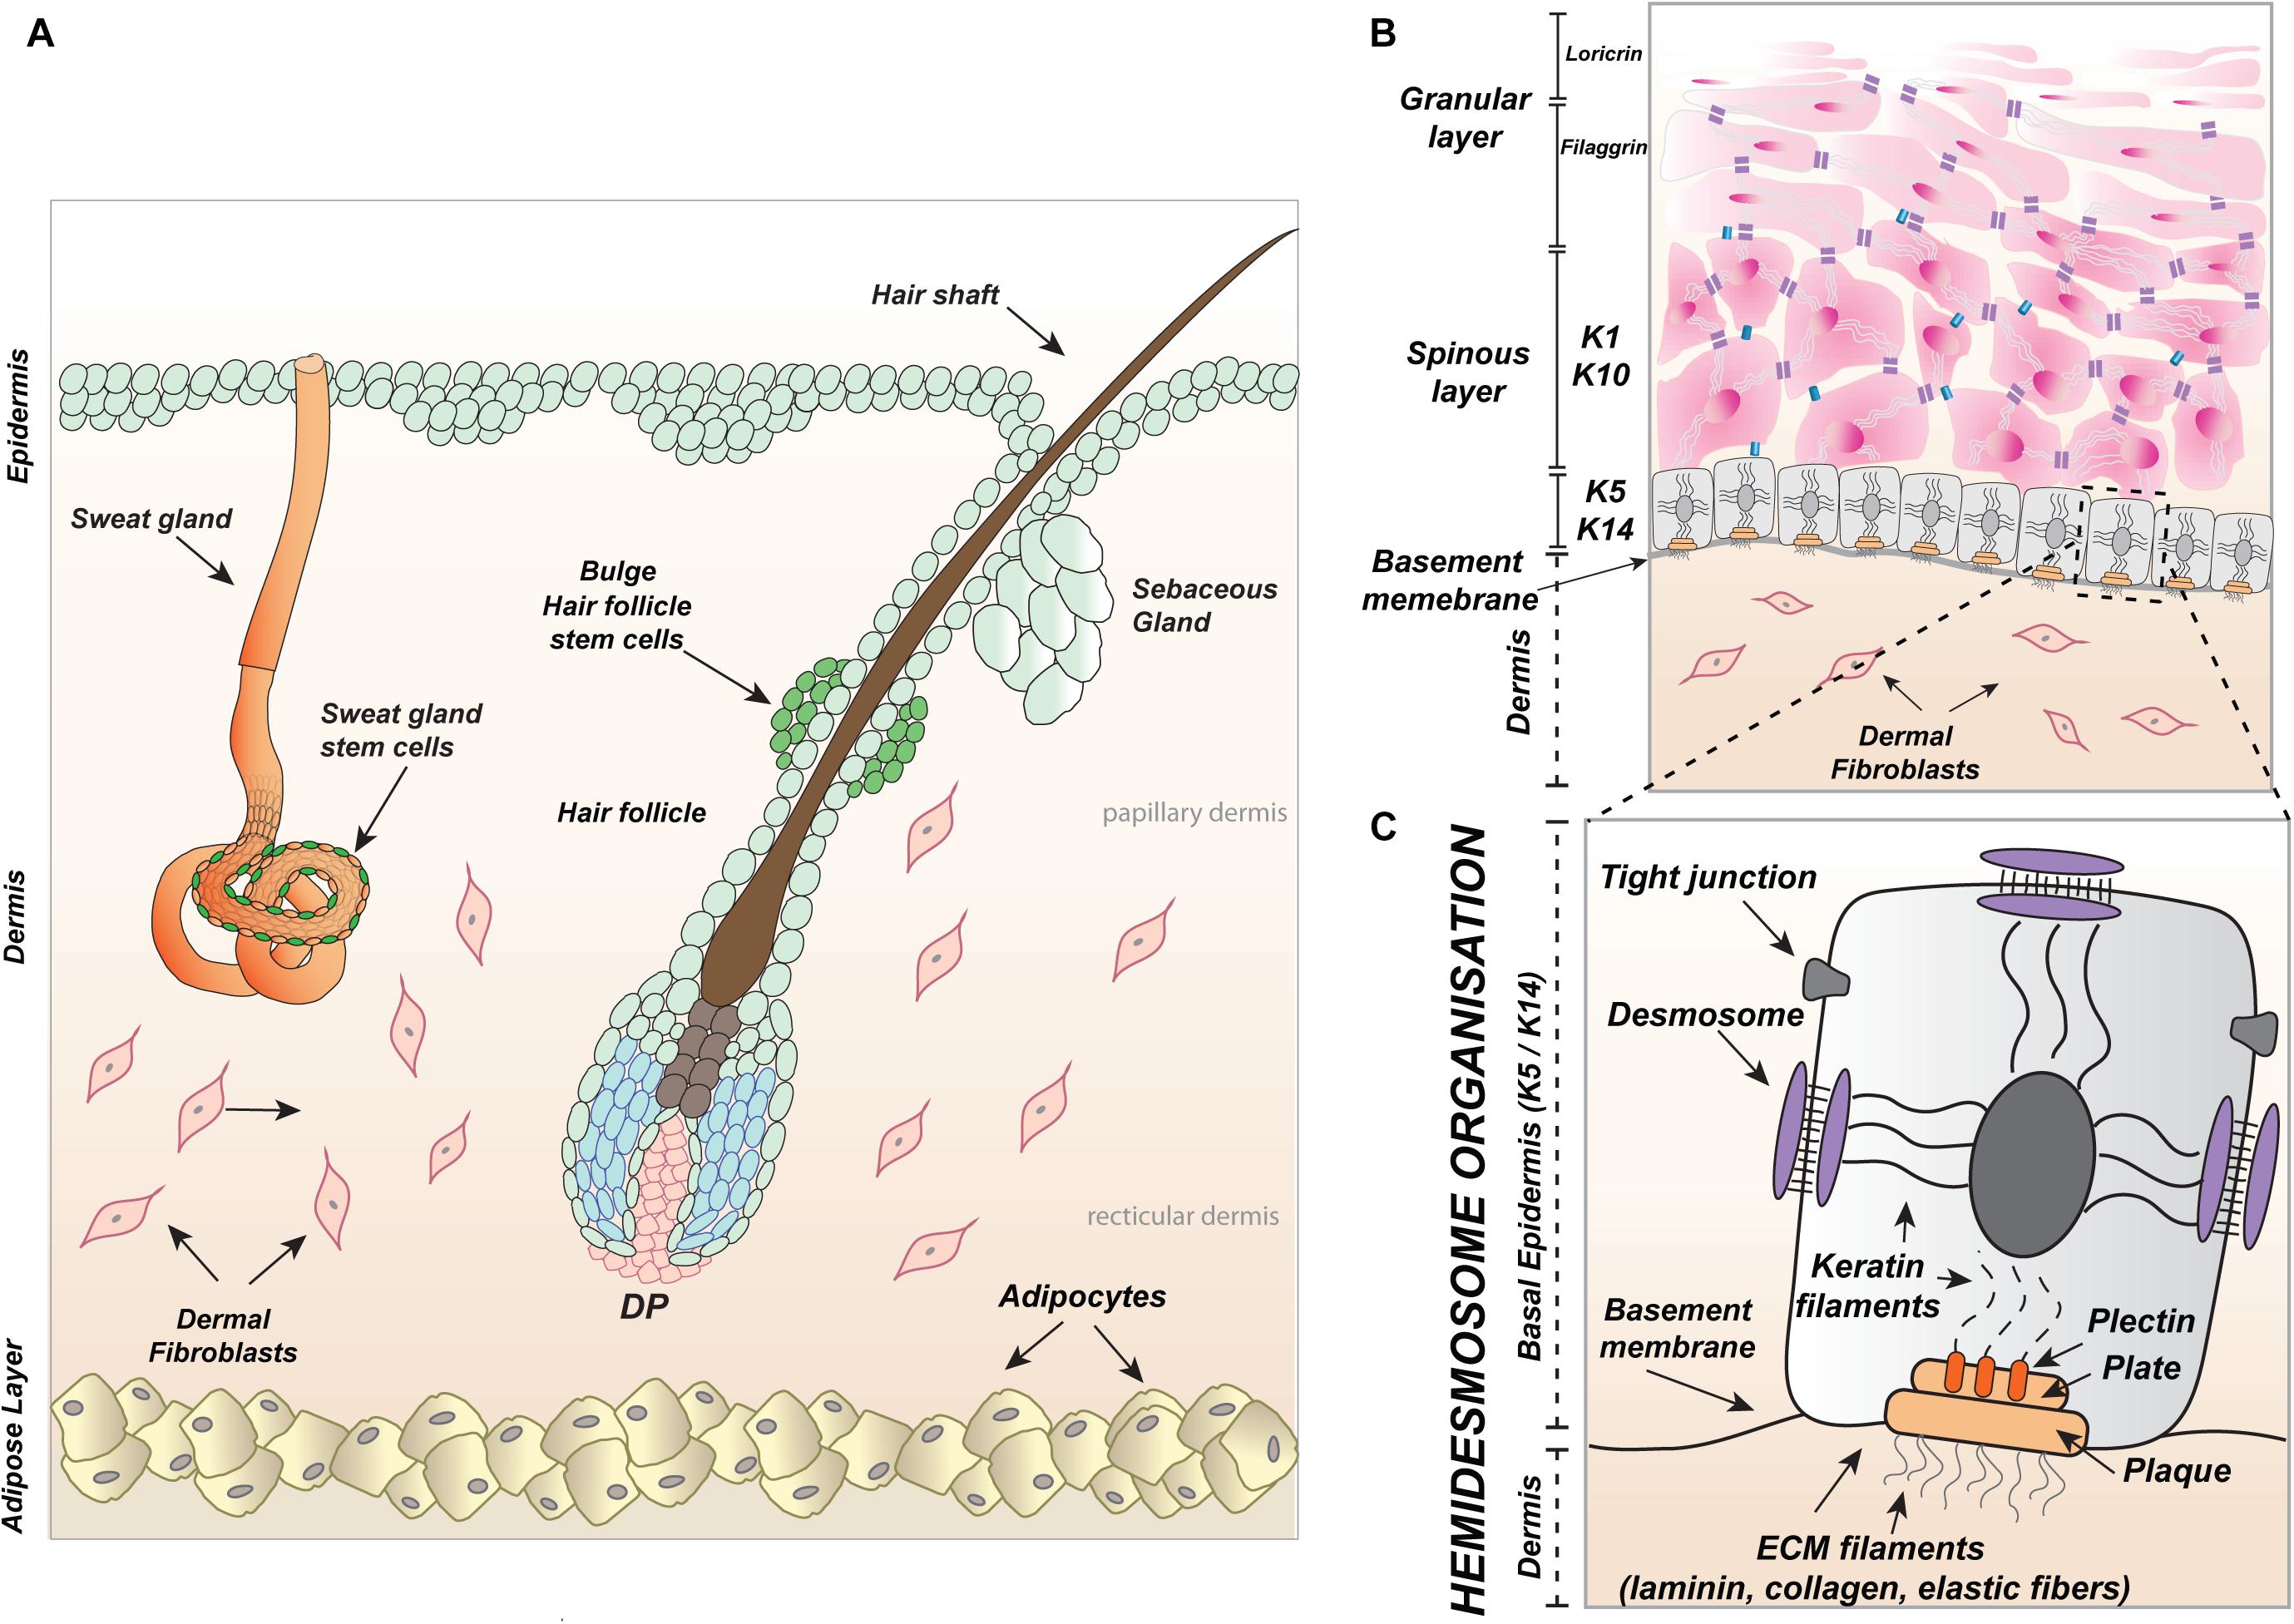 Frontiers | An Intrinsic Oscillation of Gene Networks Inside Hair Follicle  Stem Cells: An Additional Layer That Can Modulate Hair Stem Cell Activities  | Cell and Developmental Biology